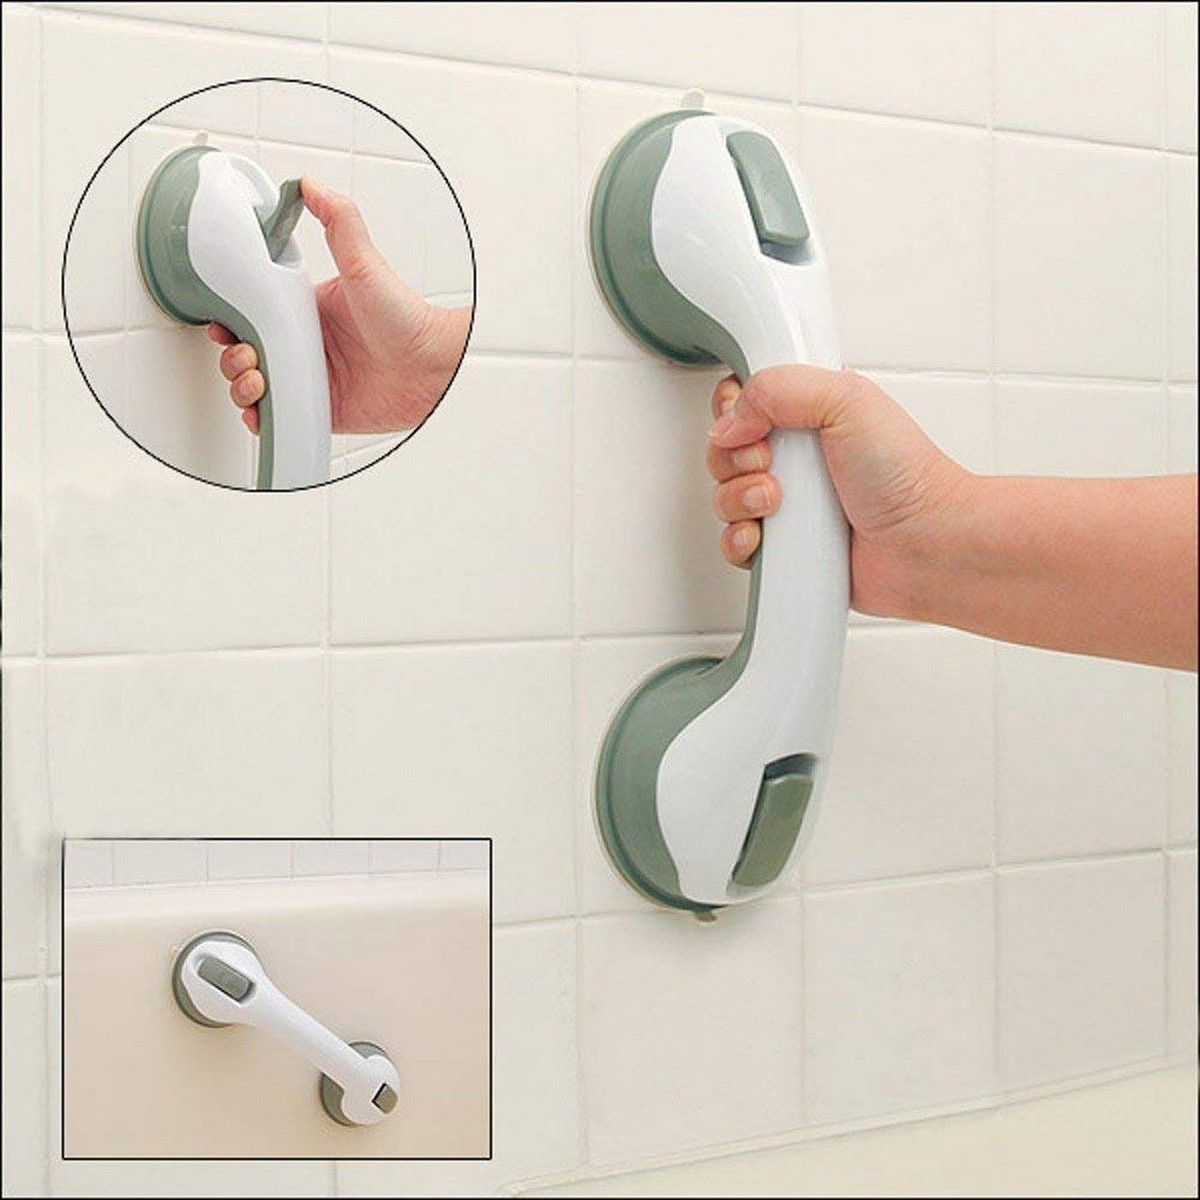 Anti-Slip Suction Bathroom Grab Handle,Portable Mobility Aids Safety Handle with Suction Cup Fitting